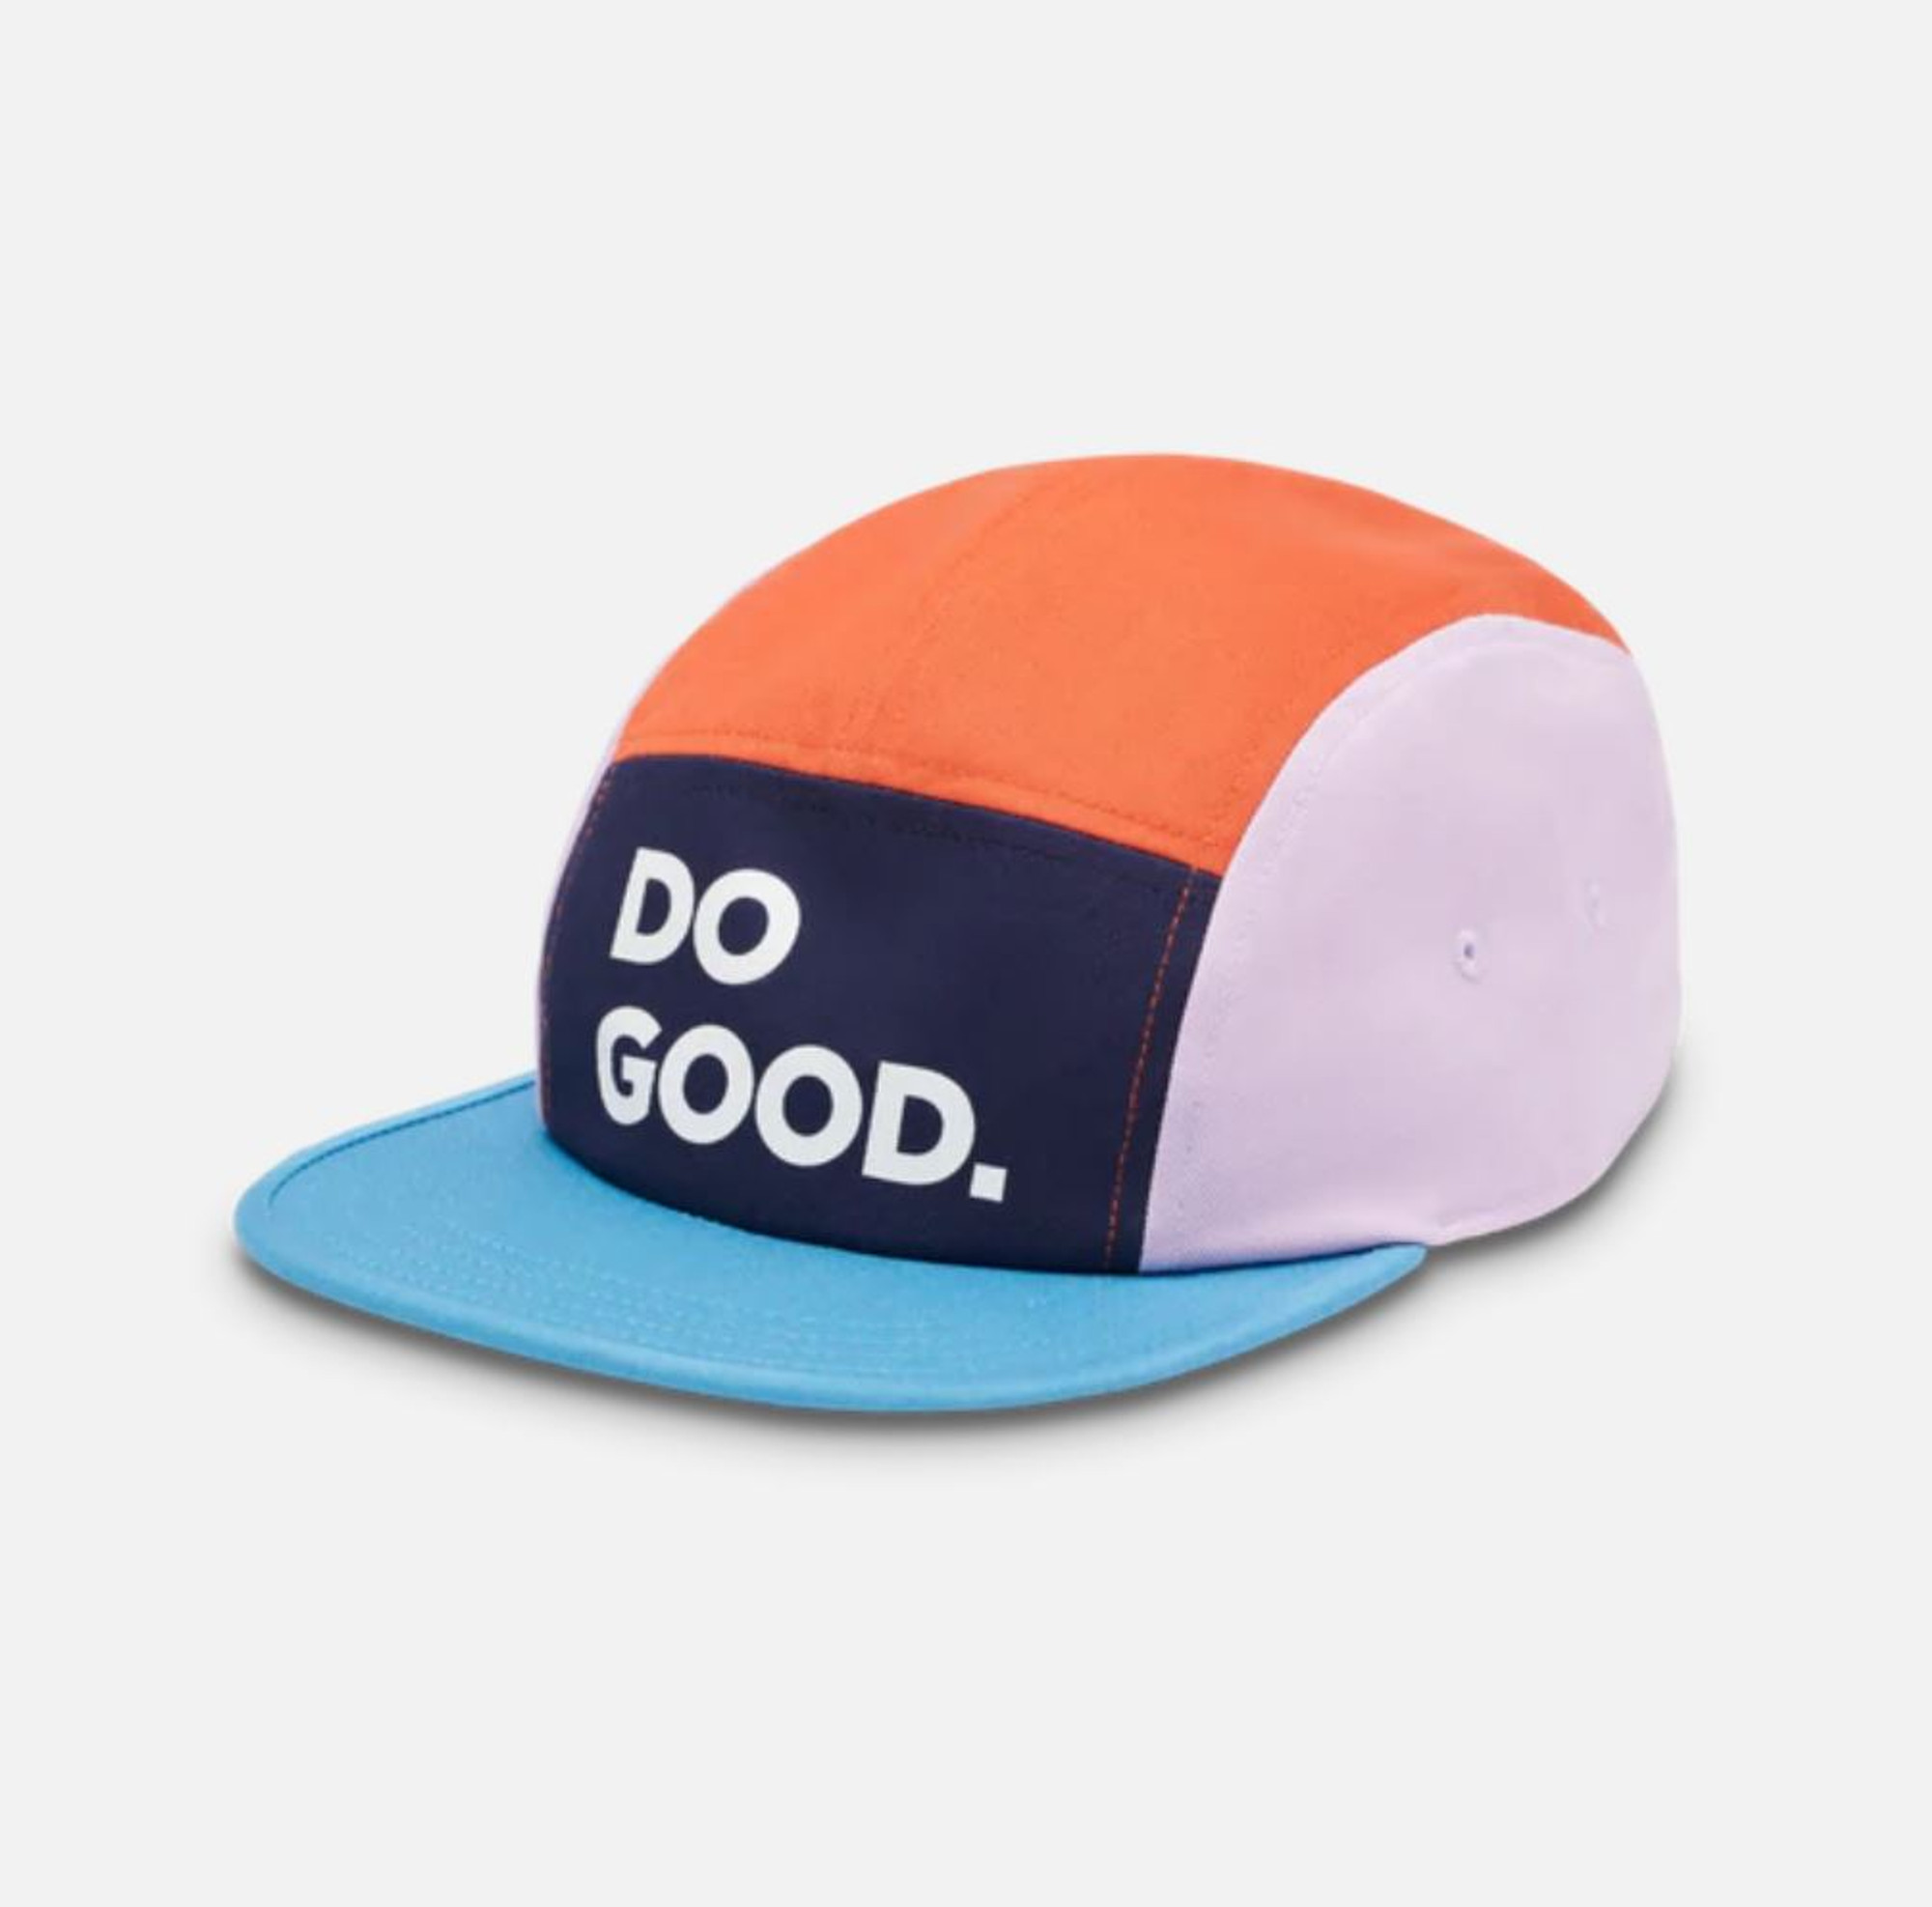 Cotopaxi Do Good 5 Panel Hat - High Mountain Sports